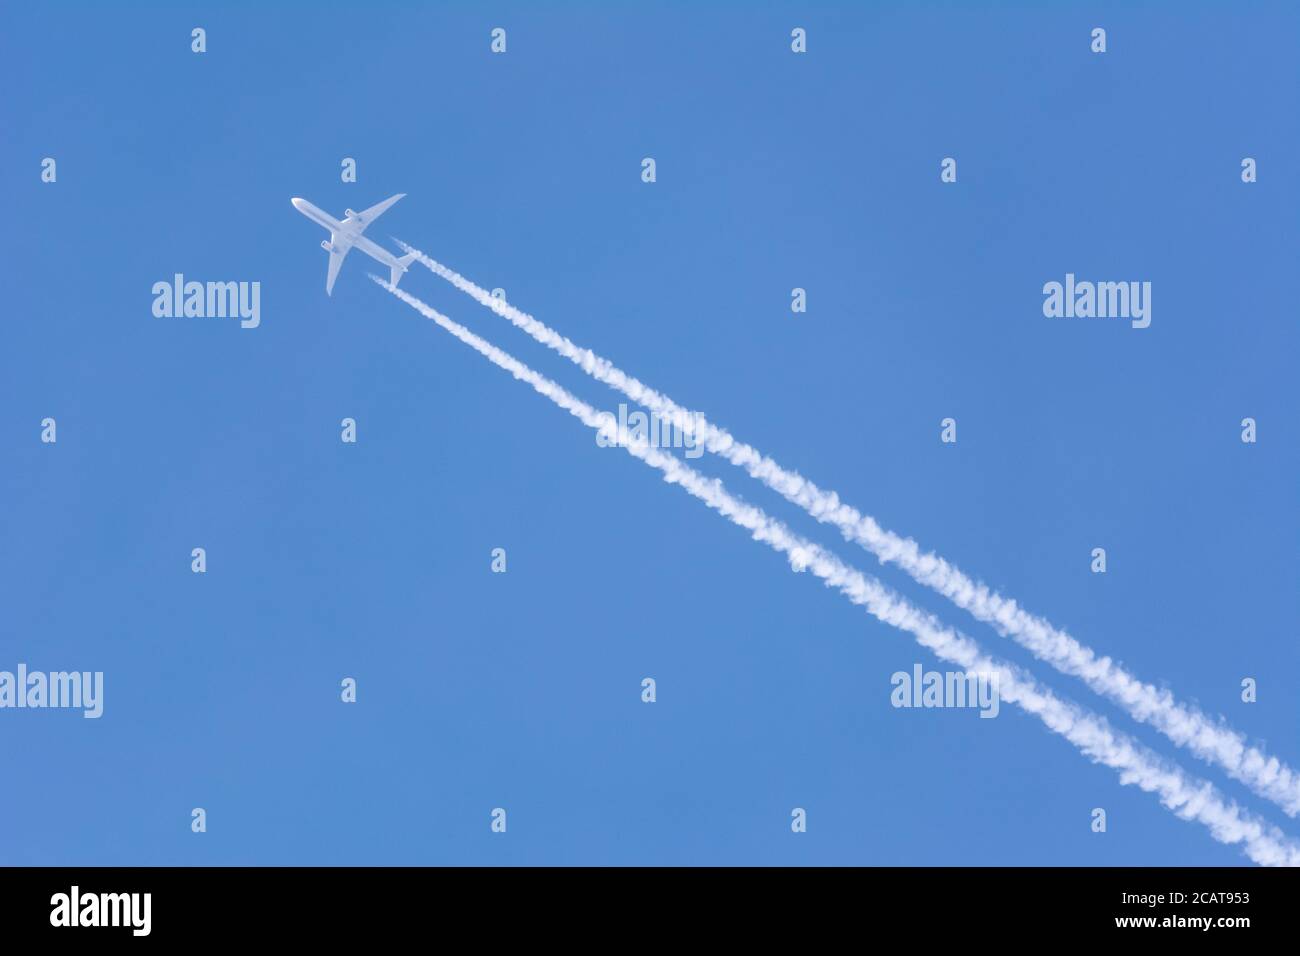 Contrails from a jet aircraft against a clear blue sky Stock Photo